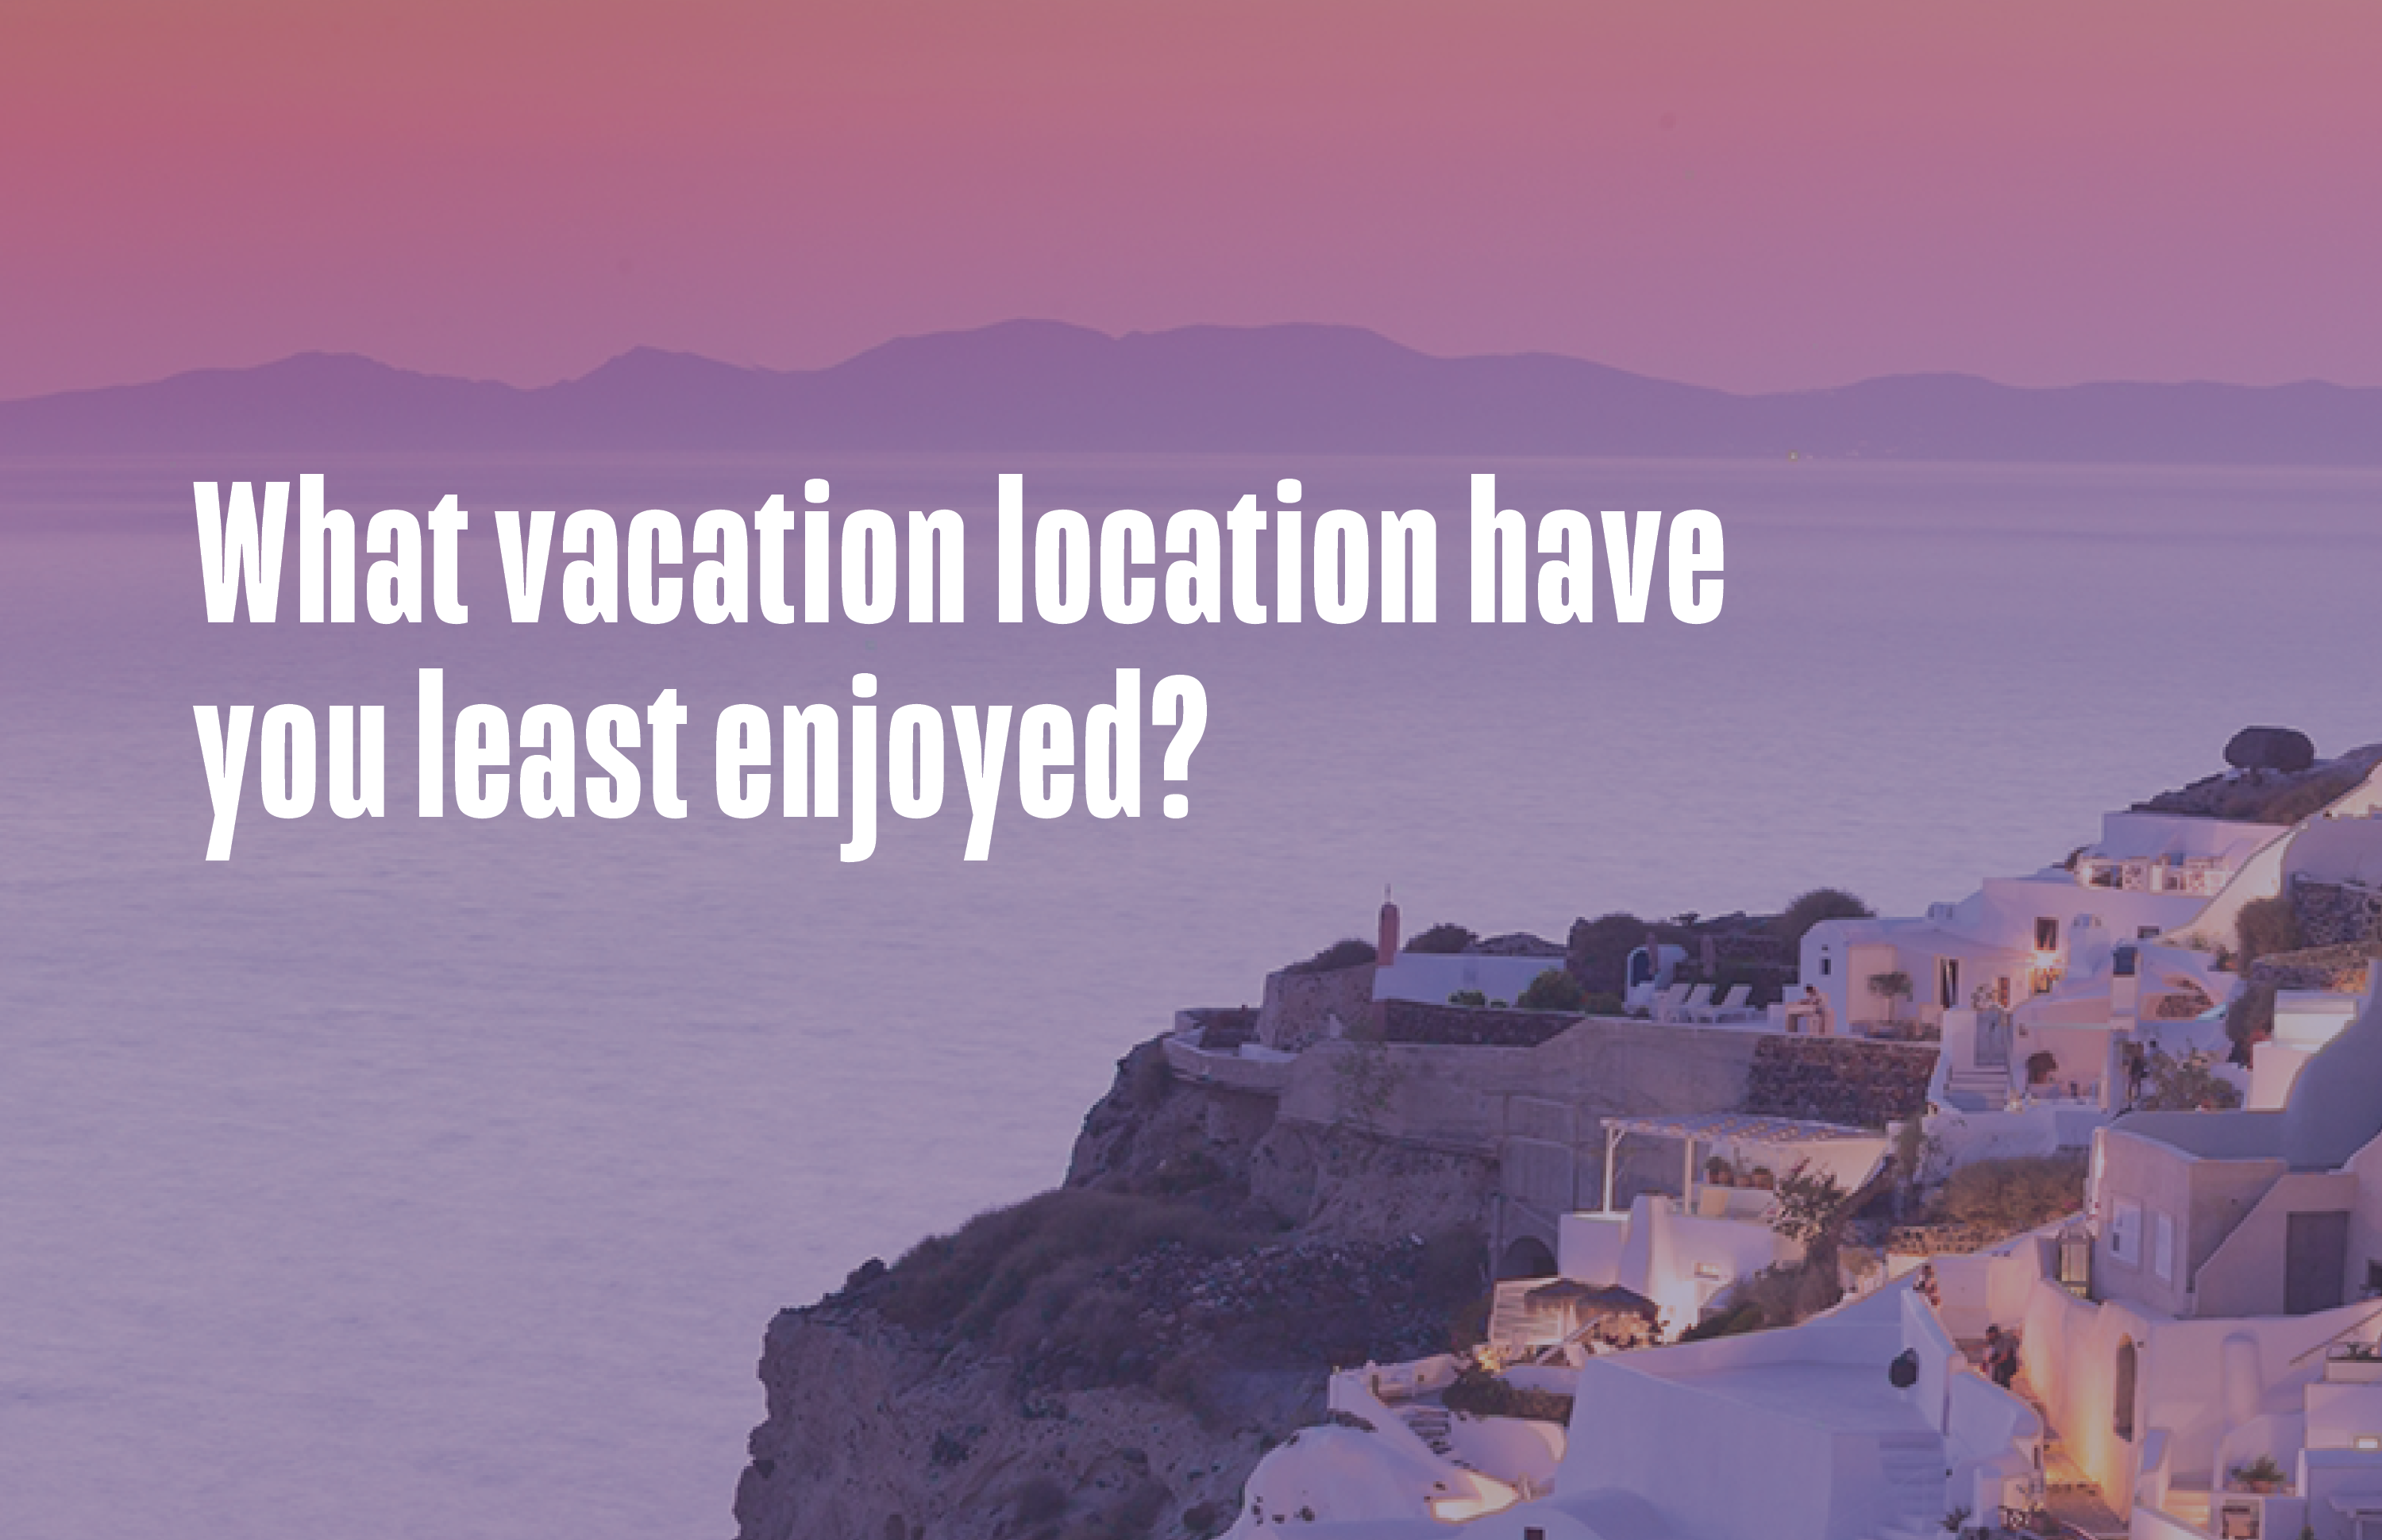 Physicians tell us their worst vacation destinations: Exclusive data